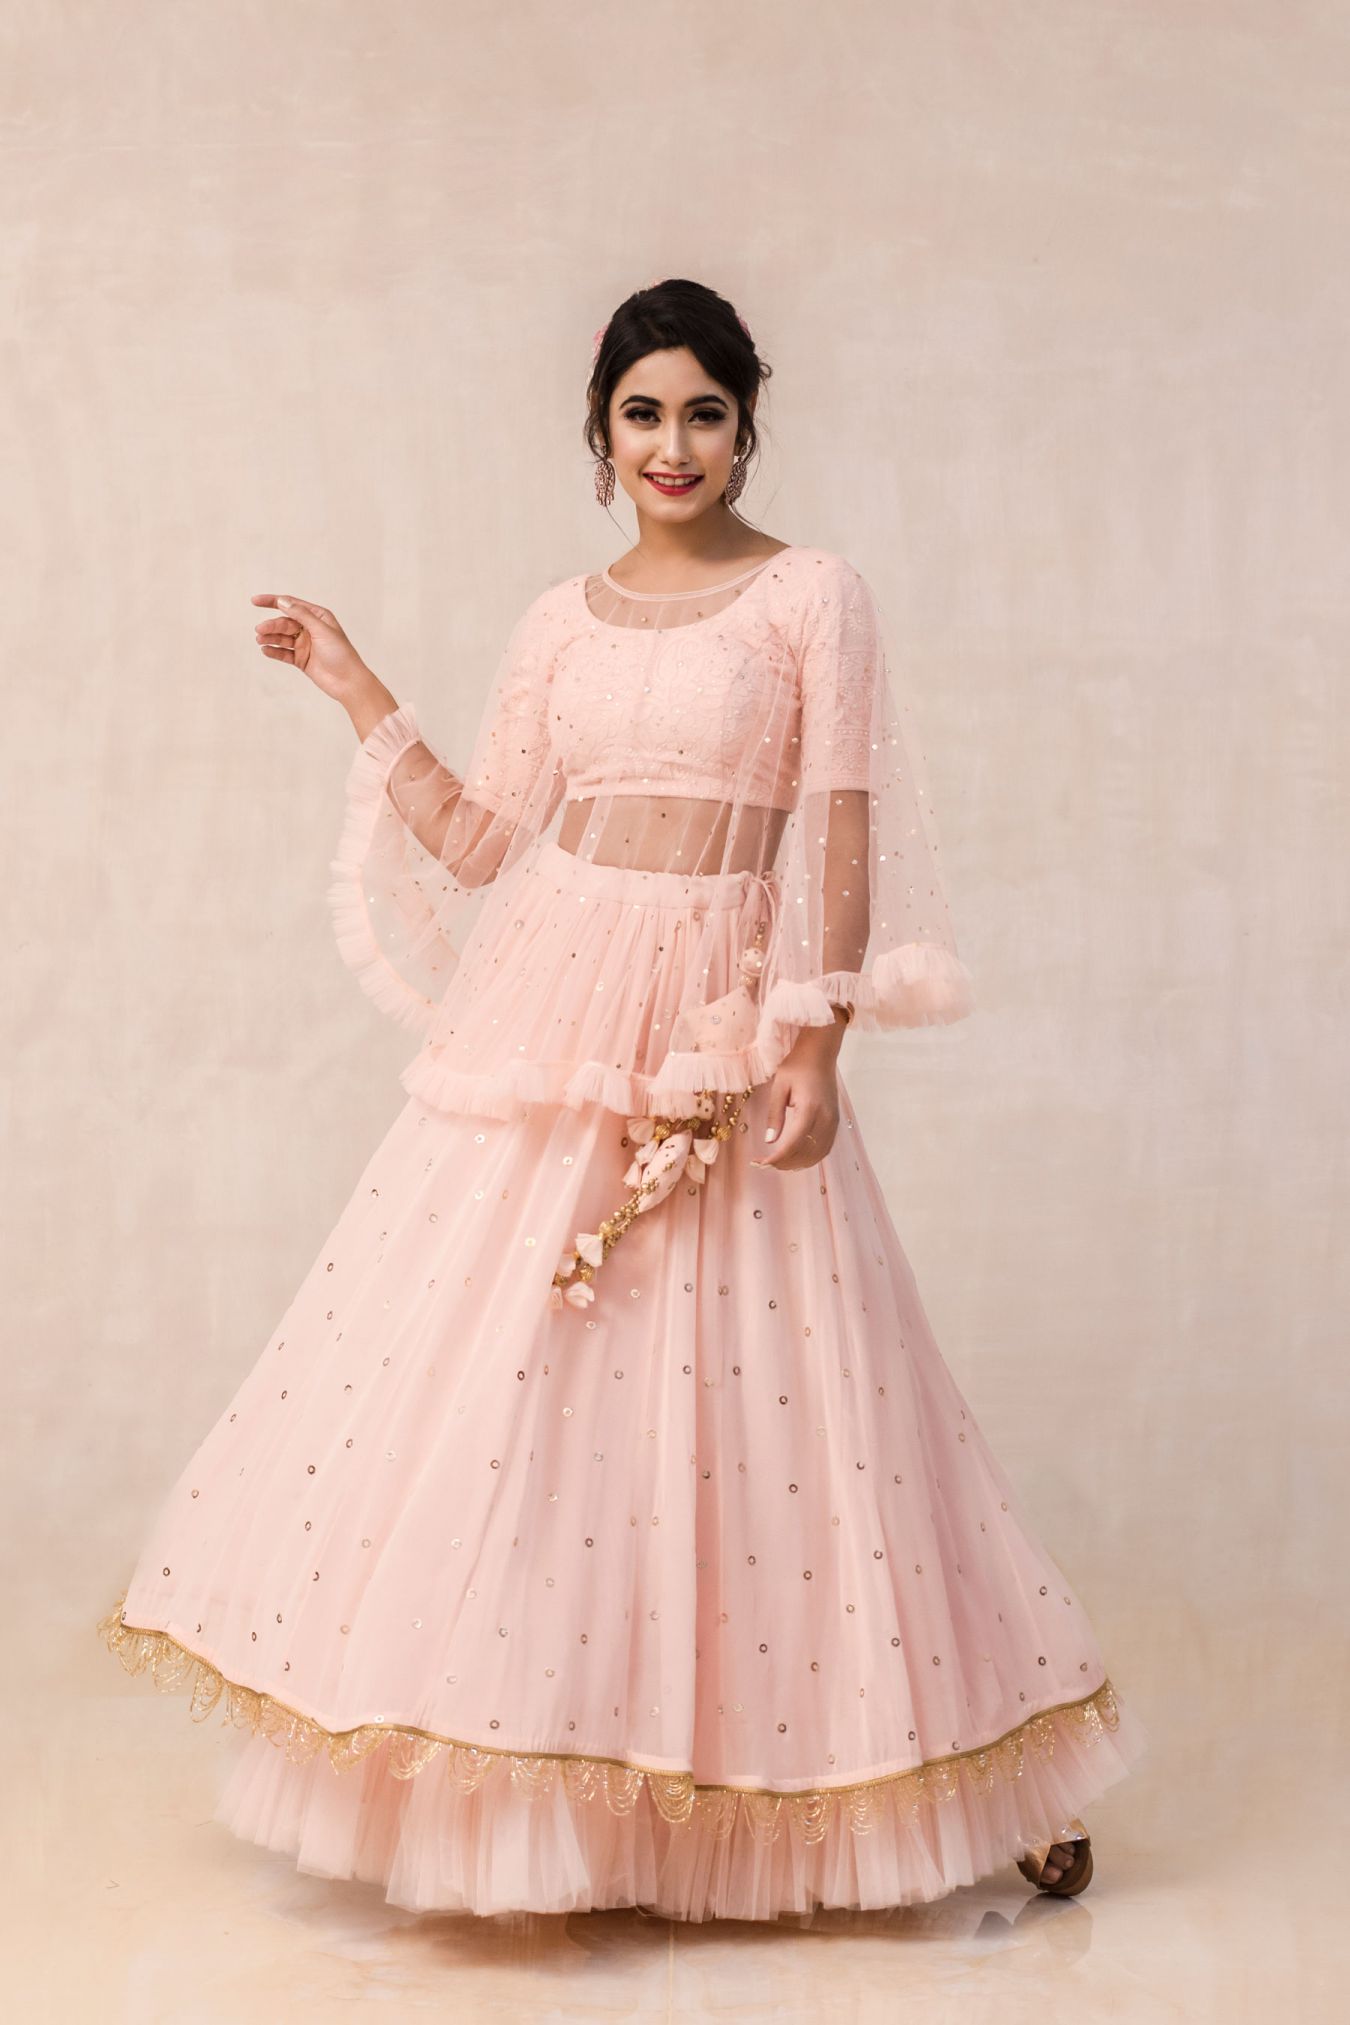 Vivacious Georgette Lehenga Paired with Handcrafted Chikan Blouse Embellished with Mukaish Rings All Over in Blooming Peach Color. Delicately Falling Sheer Cape with Frills for Accentuating the Style of the Whole Outfit